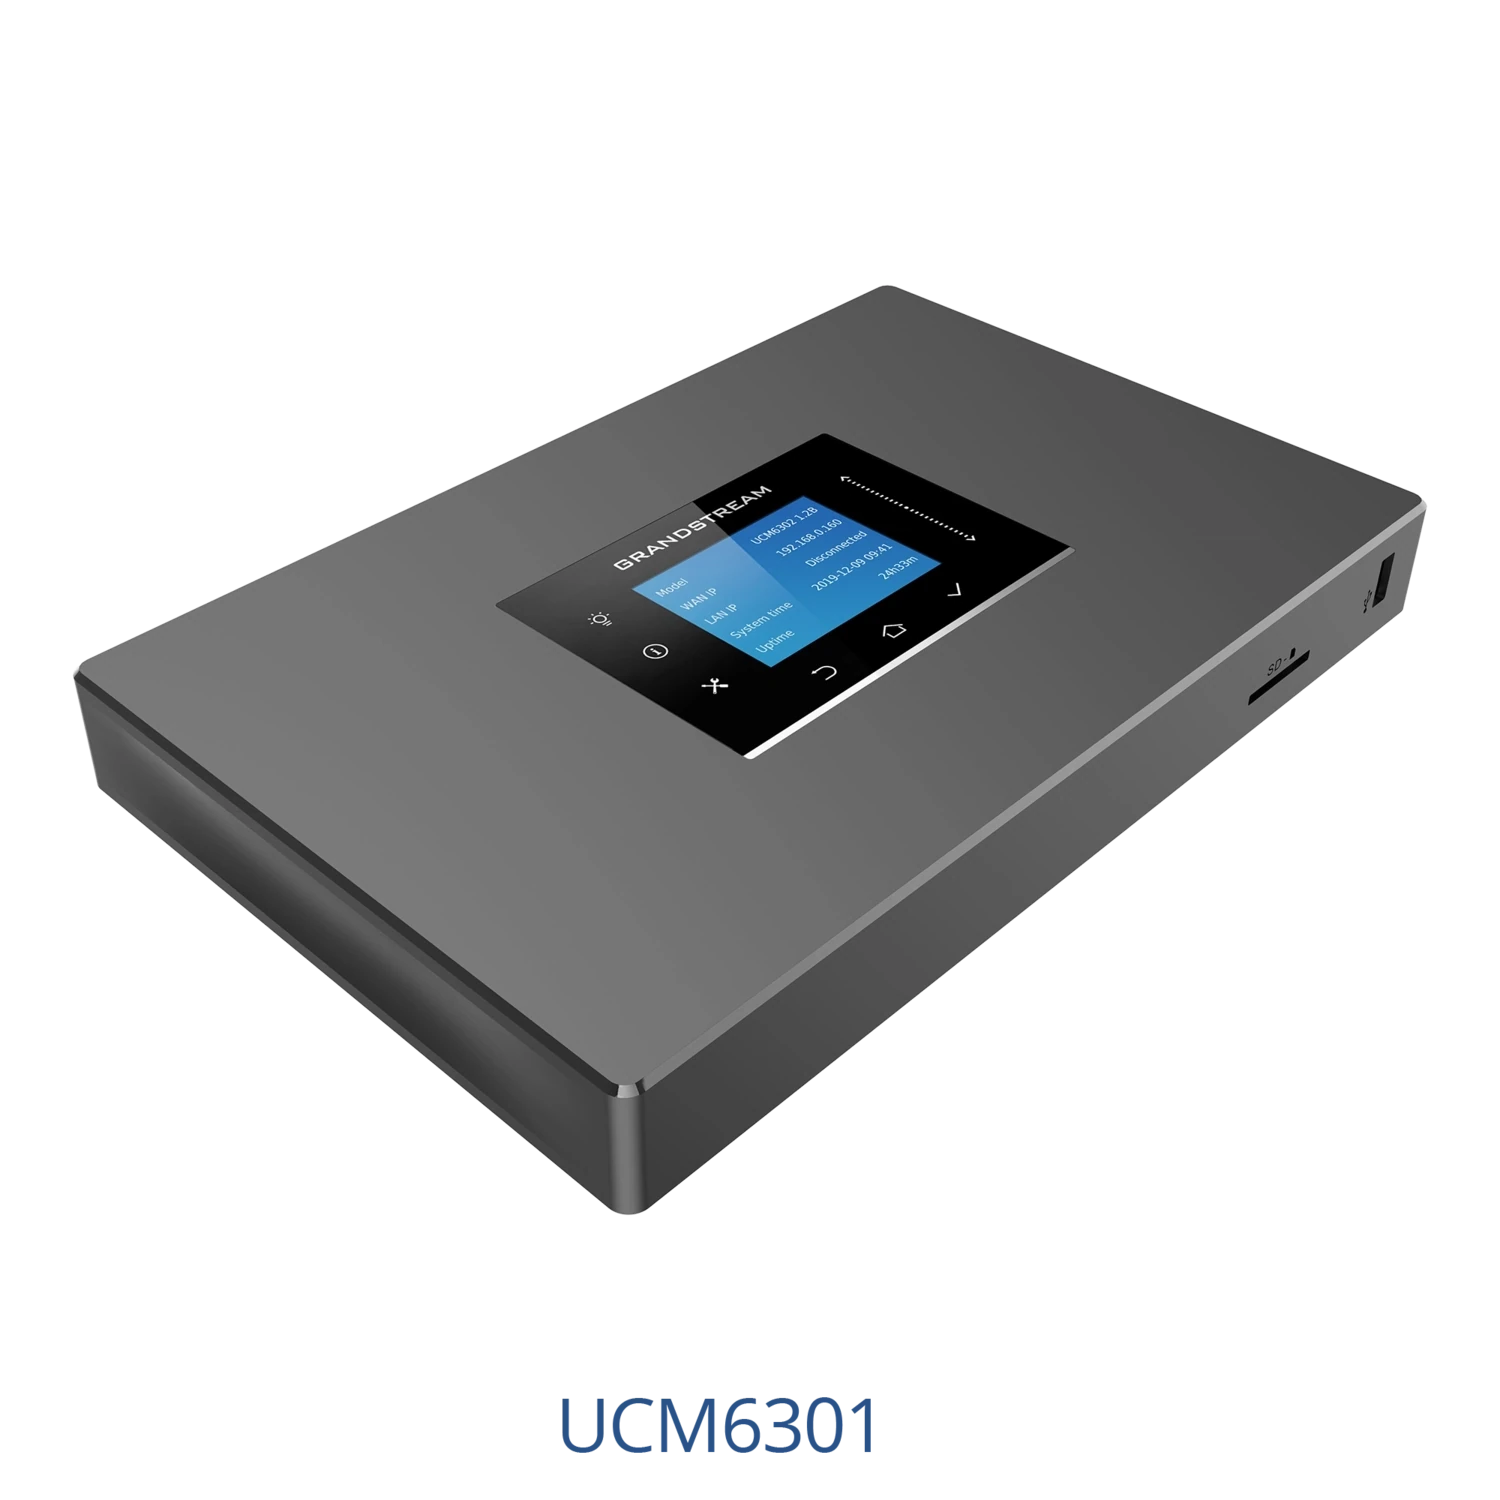 Grand Stream UCM UCM6302A IP Phone System